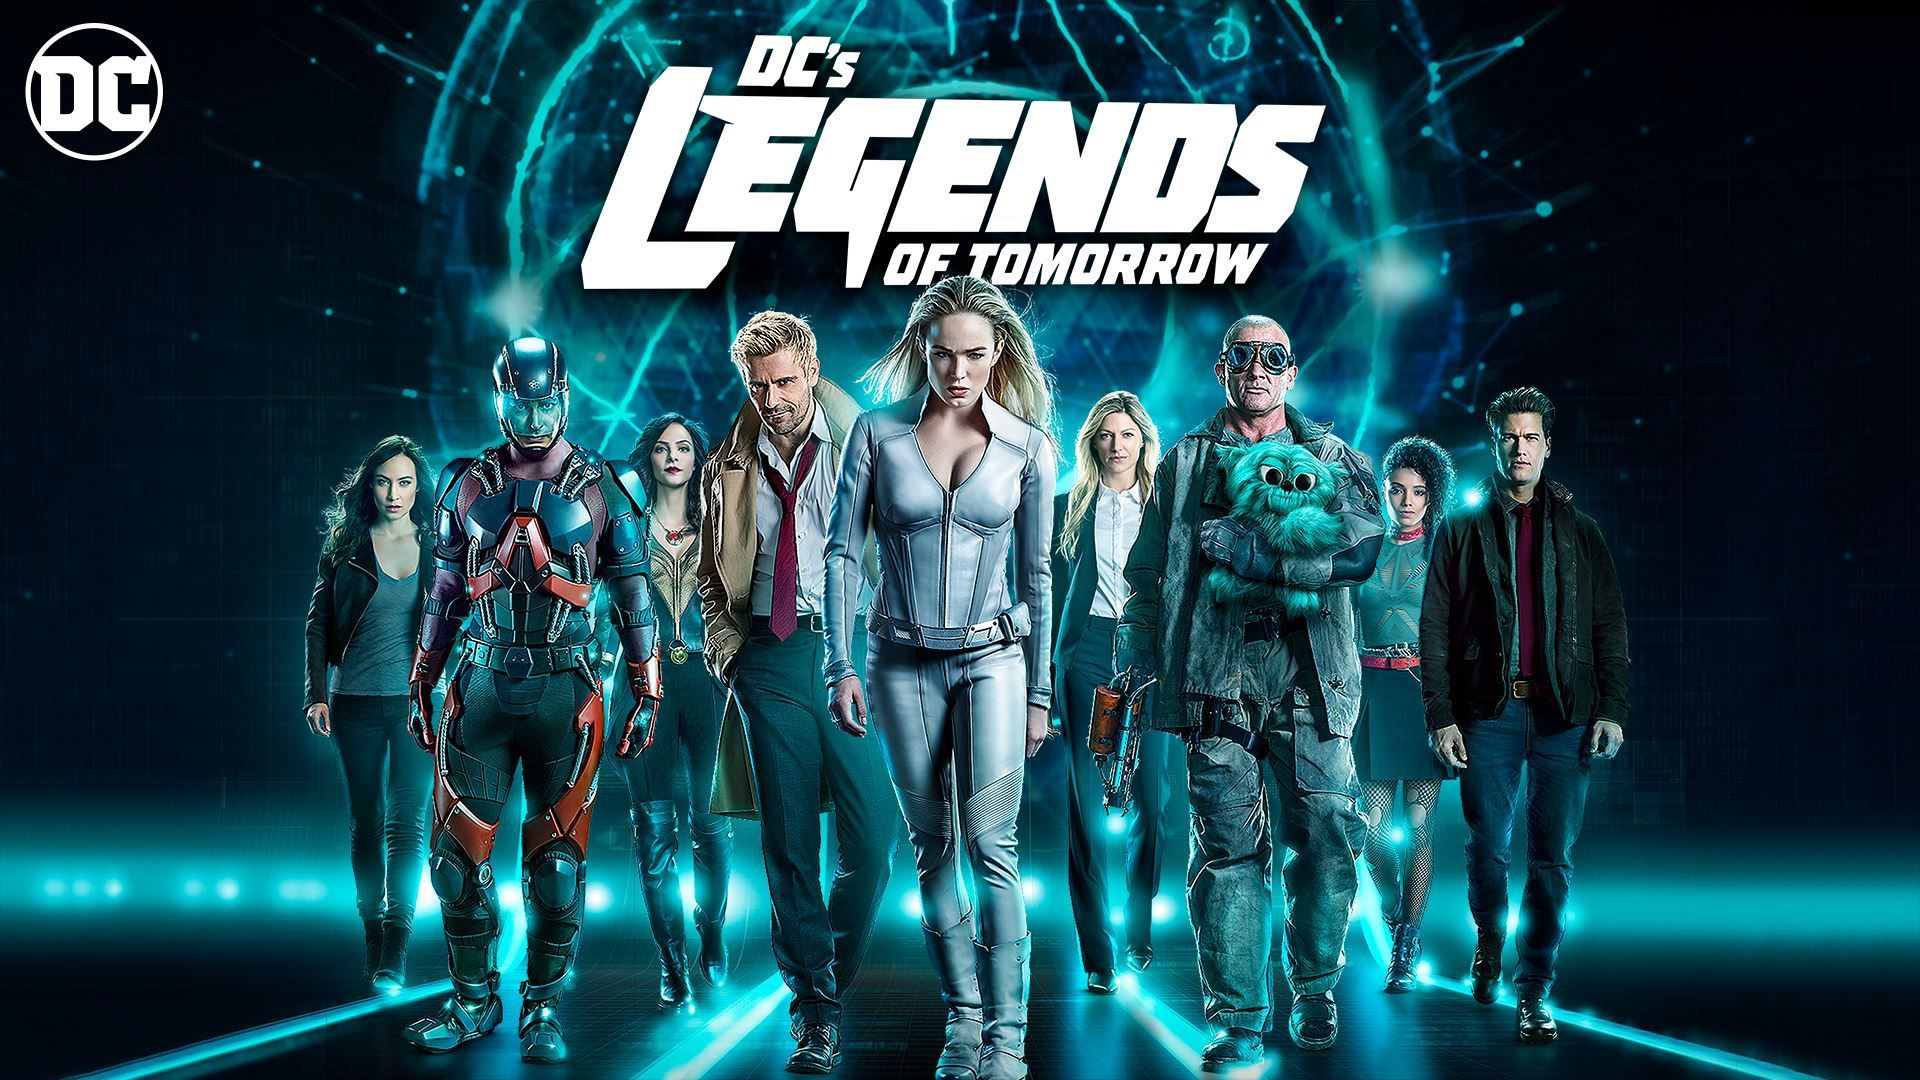 DC Legends of Tomorrow Wallpaper Free DC Legends of Tomorrow Background